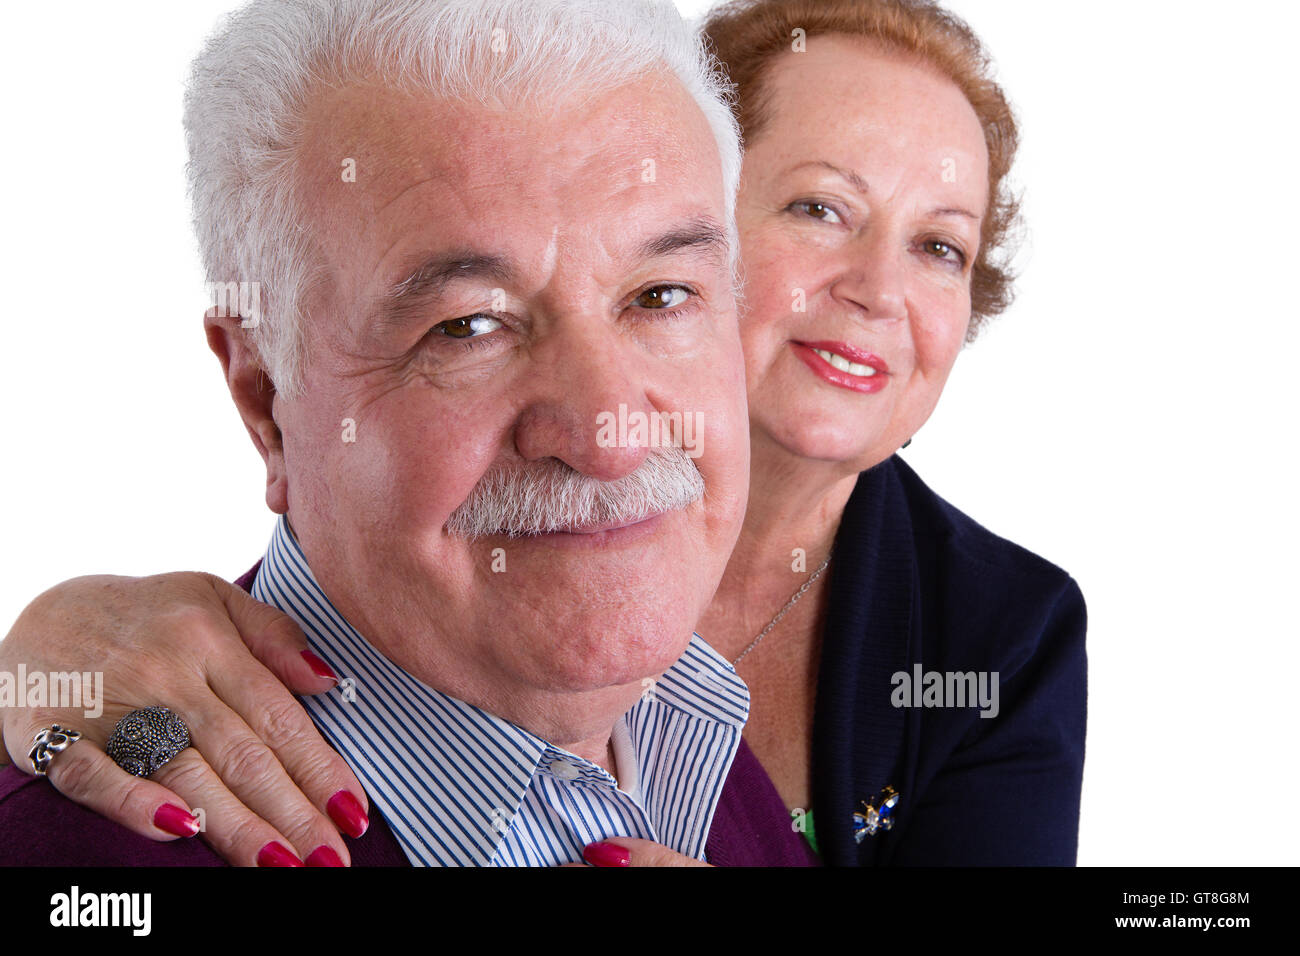 Close up Happy Senior Business Couple Smiling at the Camera Against White Background. Stock Photo